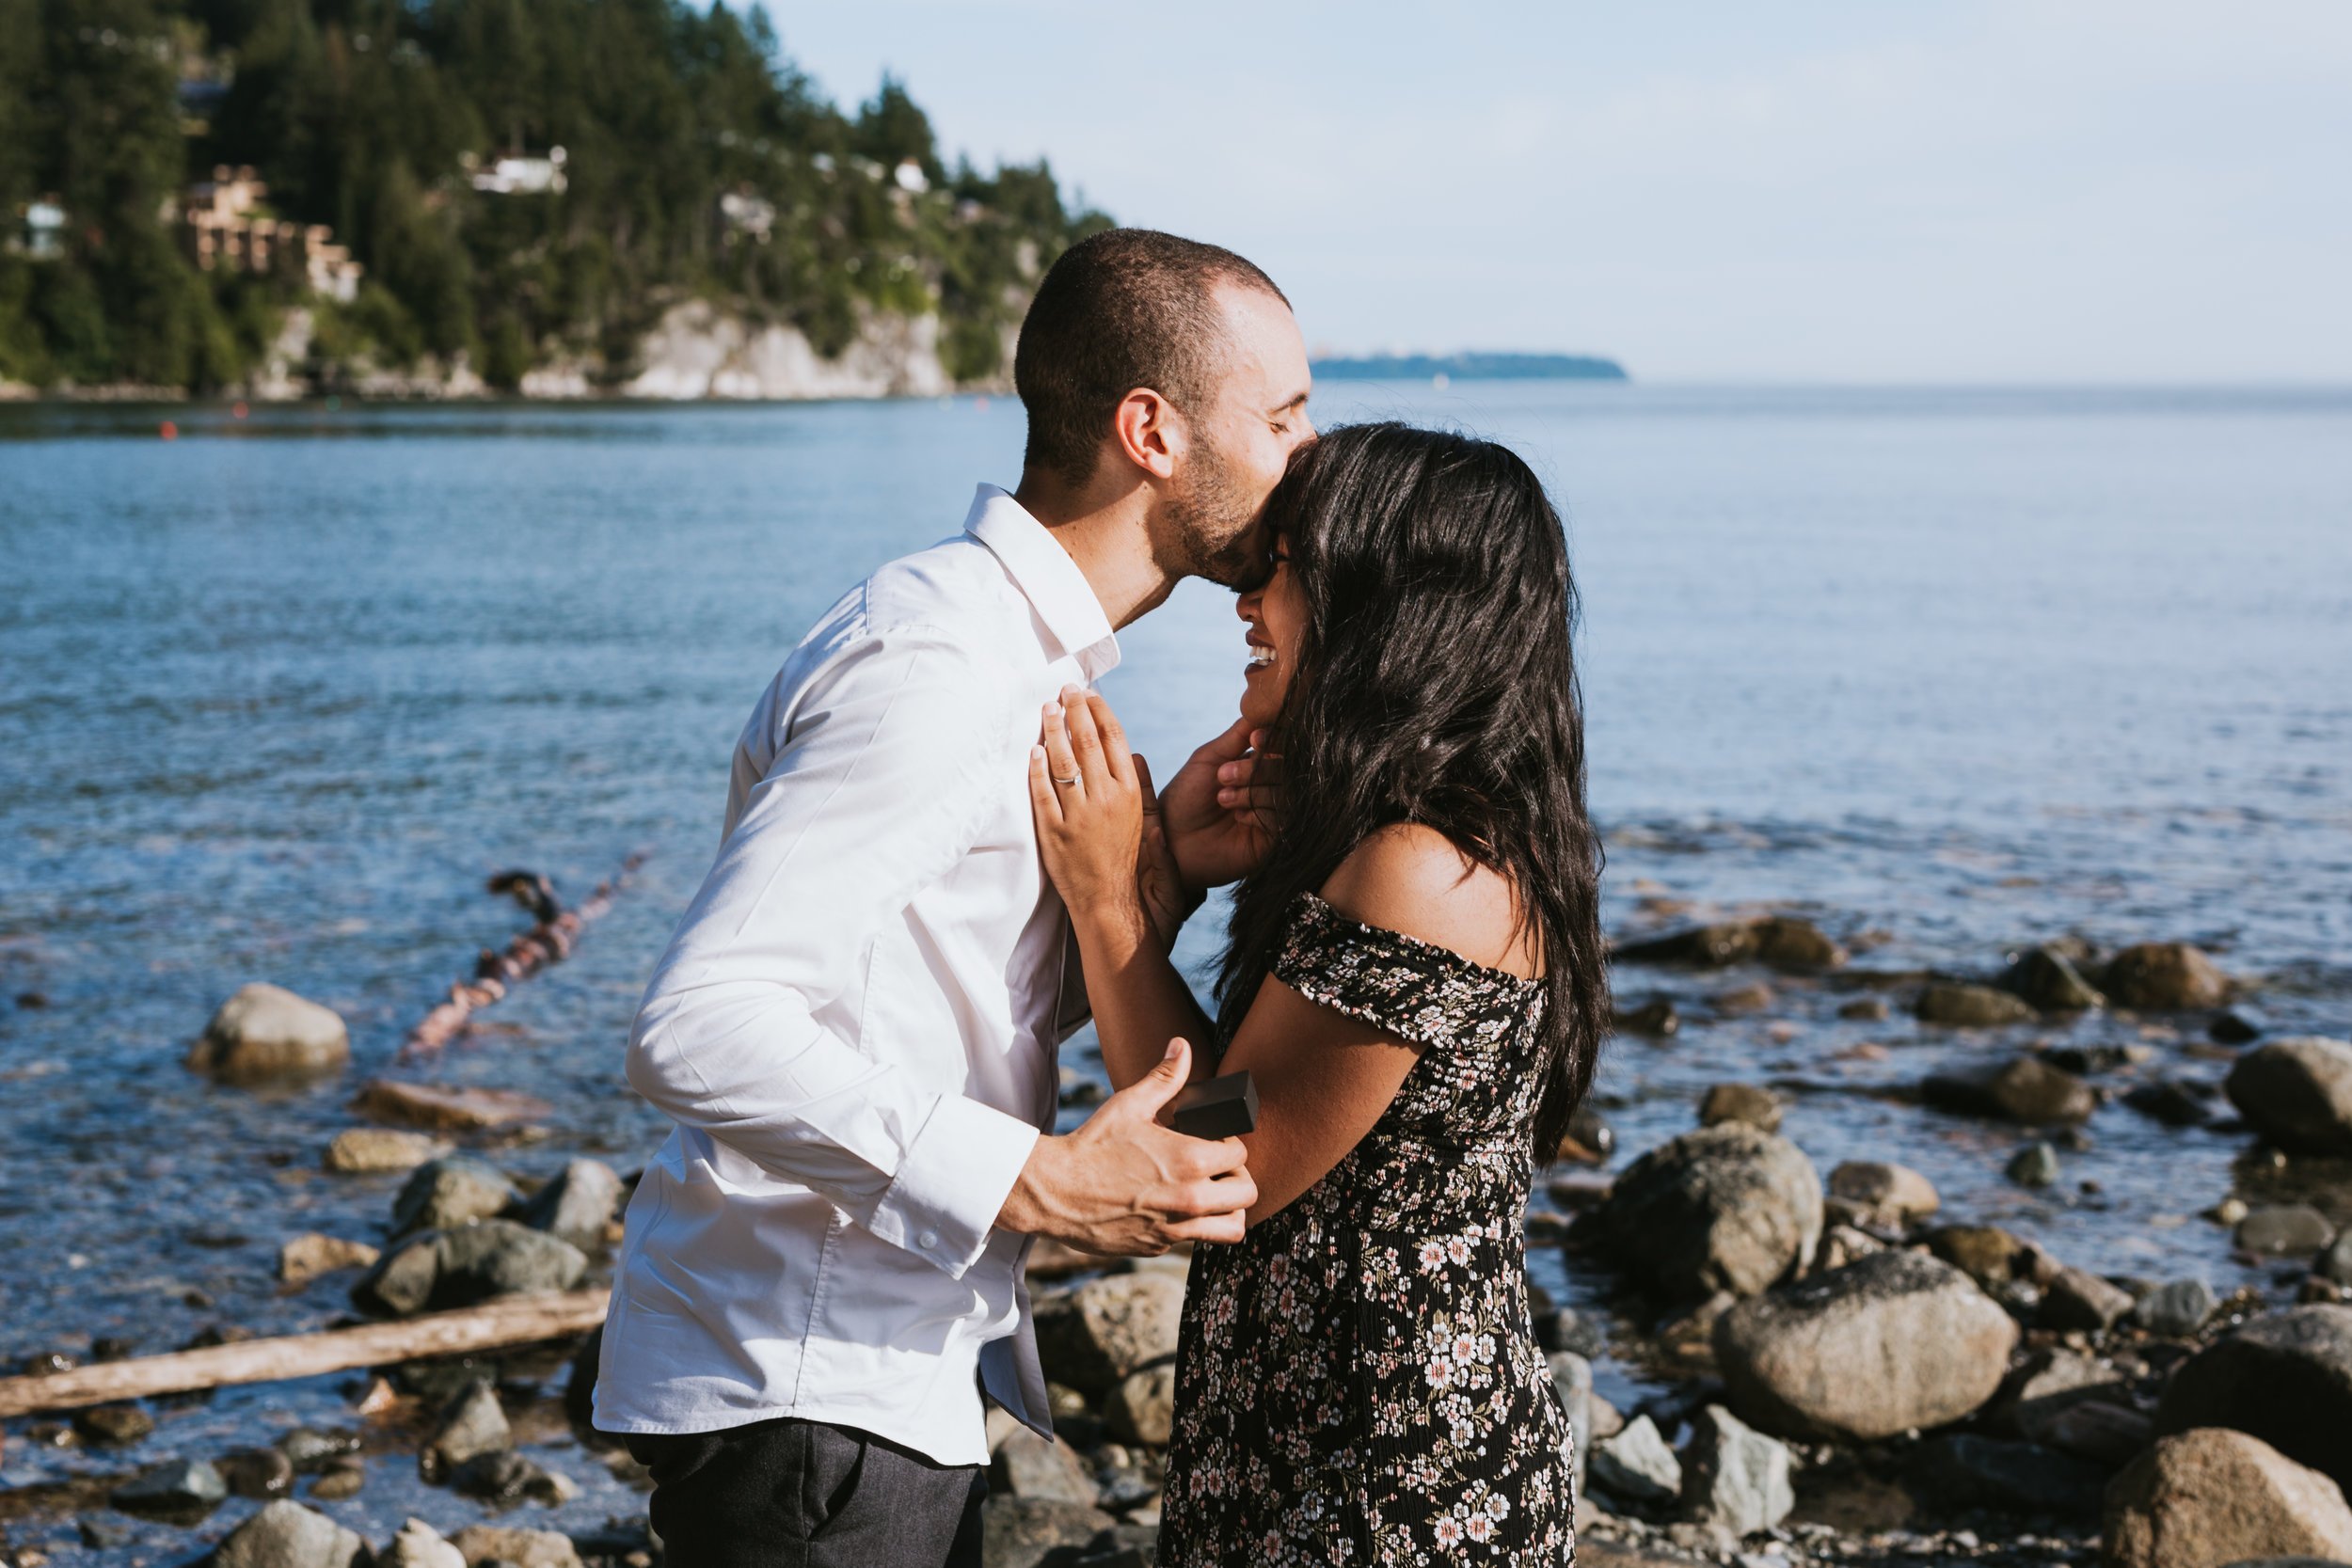 oliver-rabanes-vancouver-surrey-whytecliff-park-proposal-engagement-photography-18.JPG